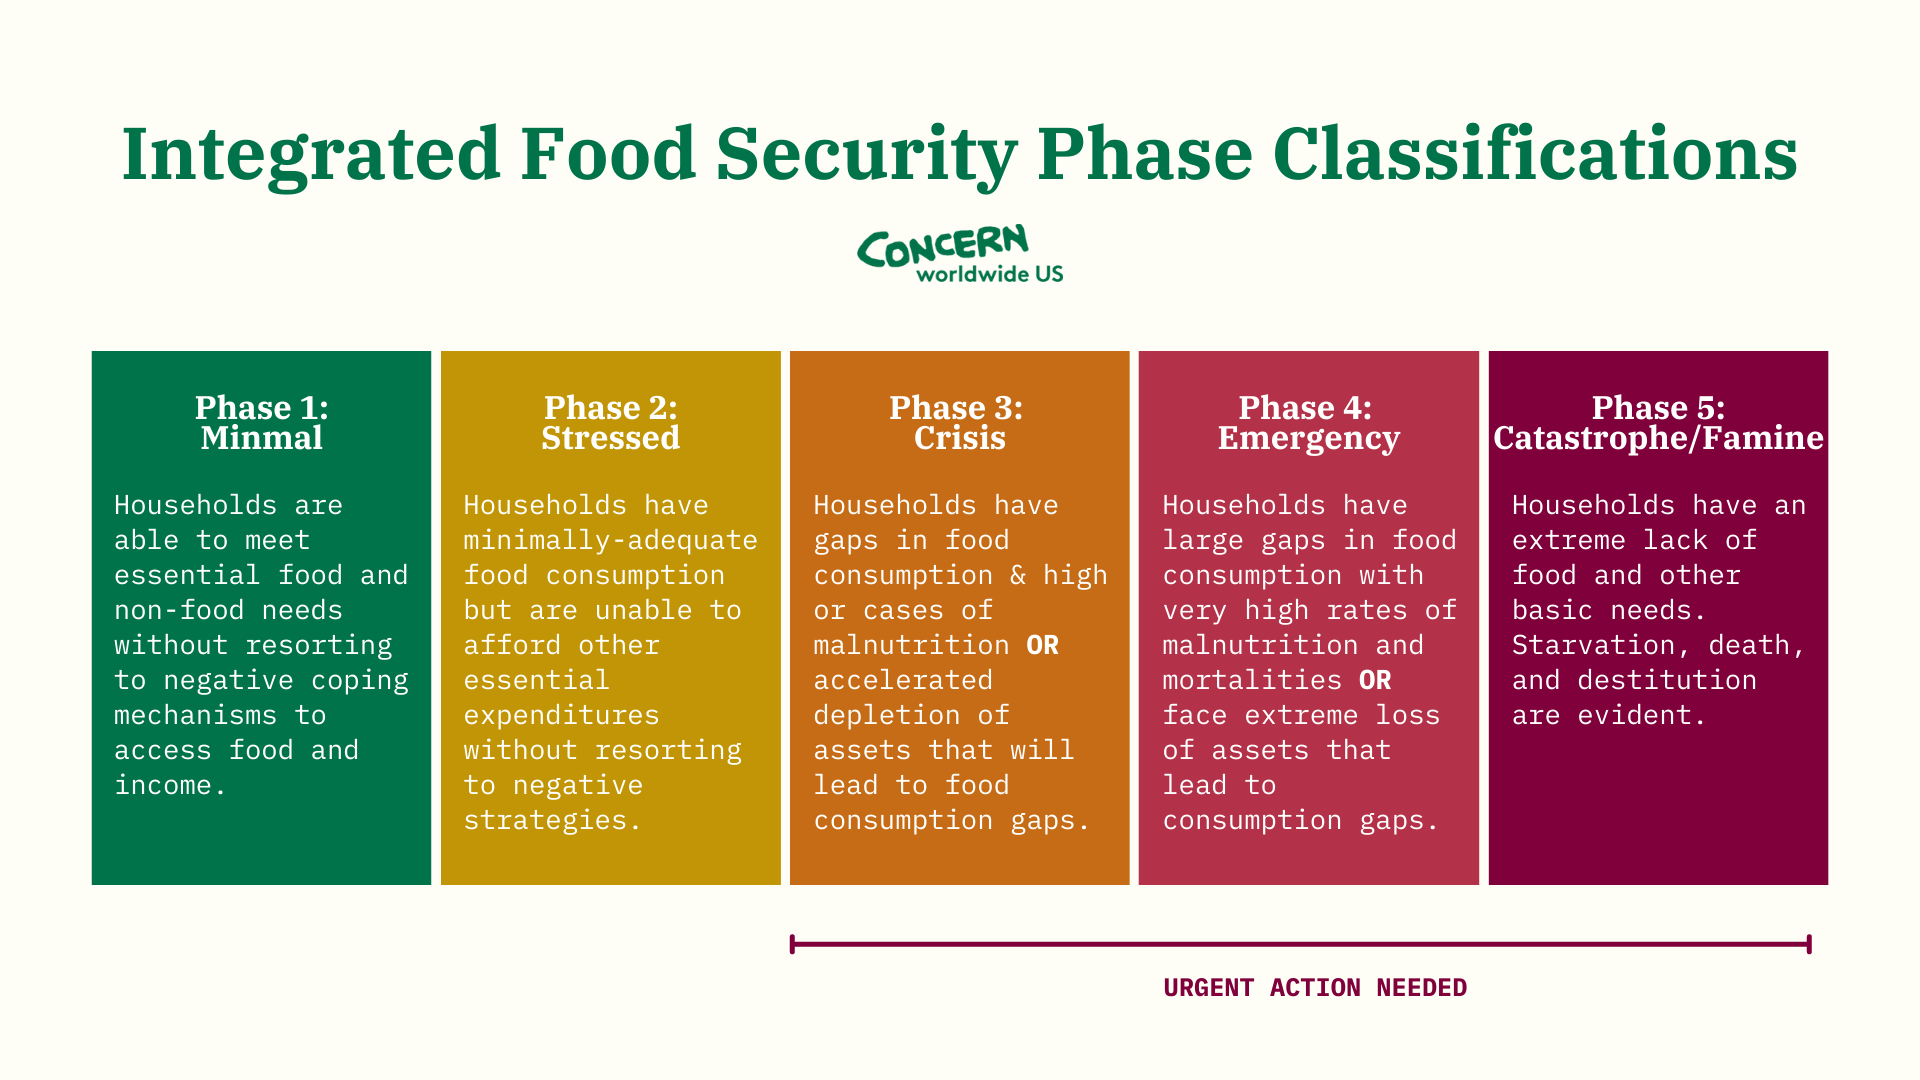 The five phases of Integrated Food Security Phase Classifications